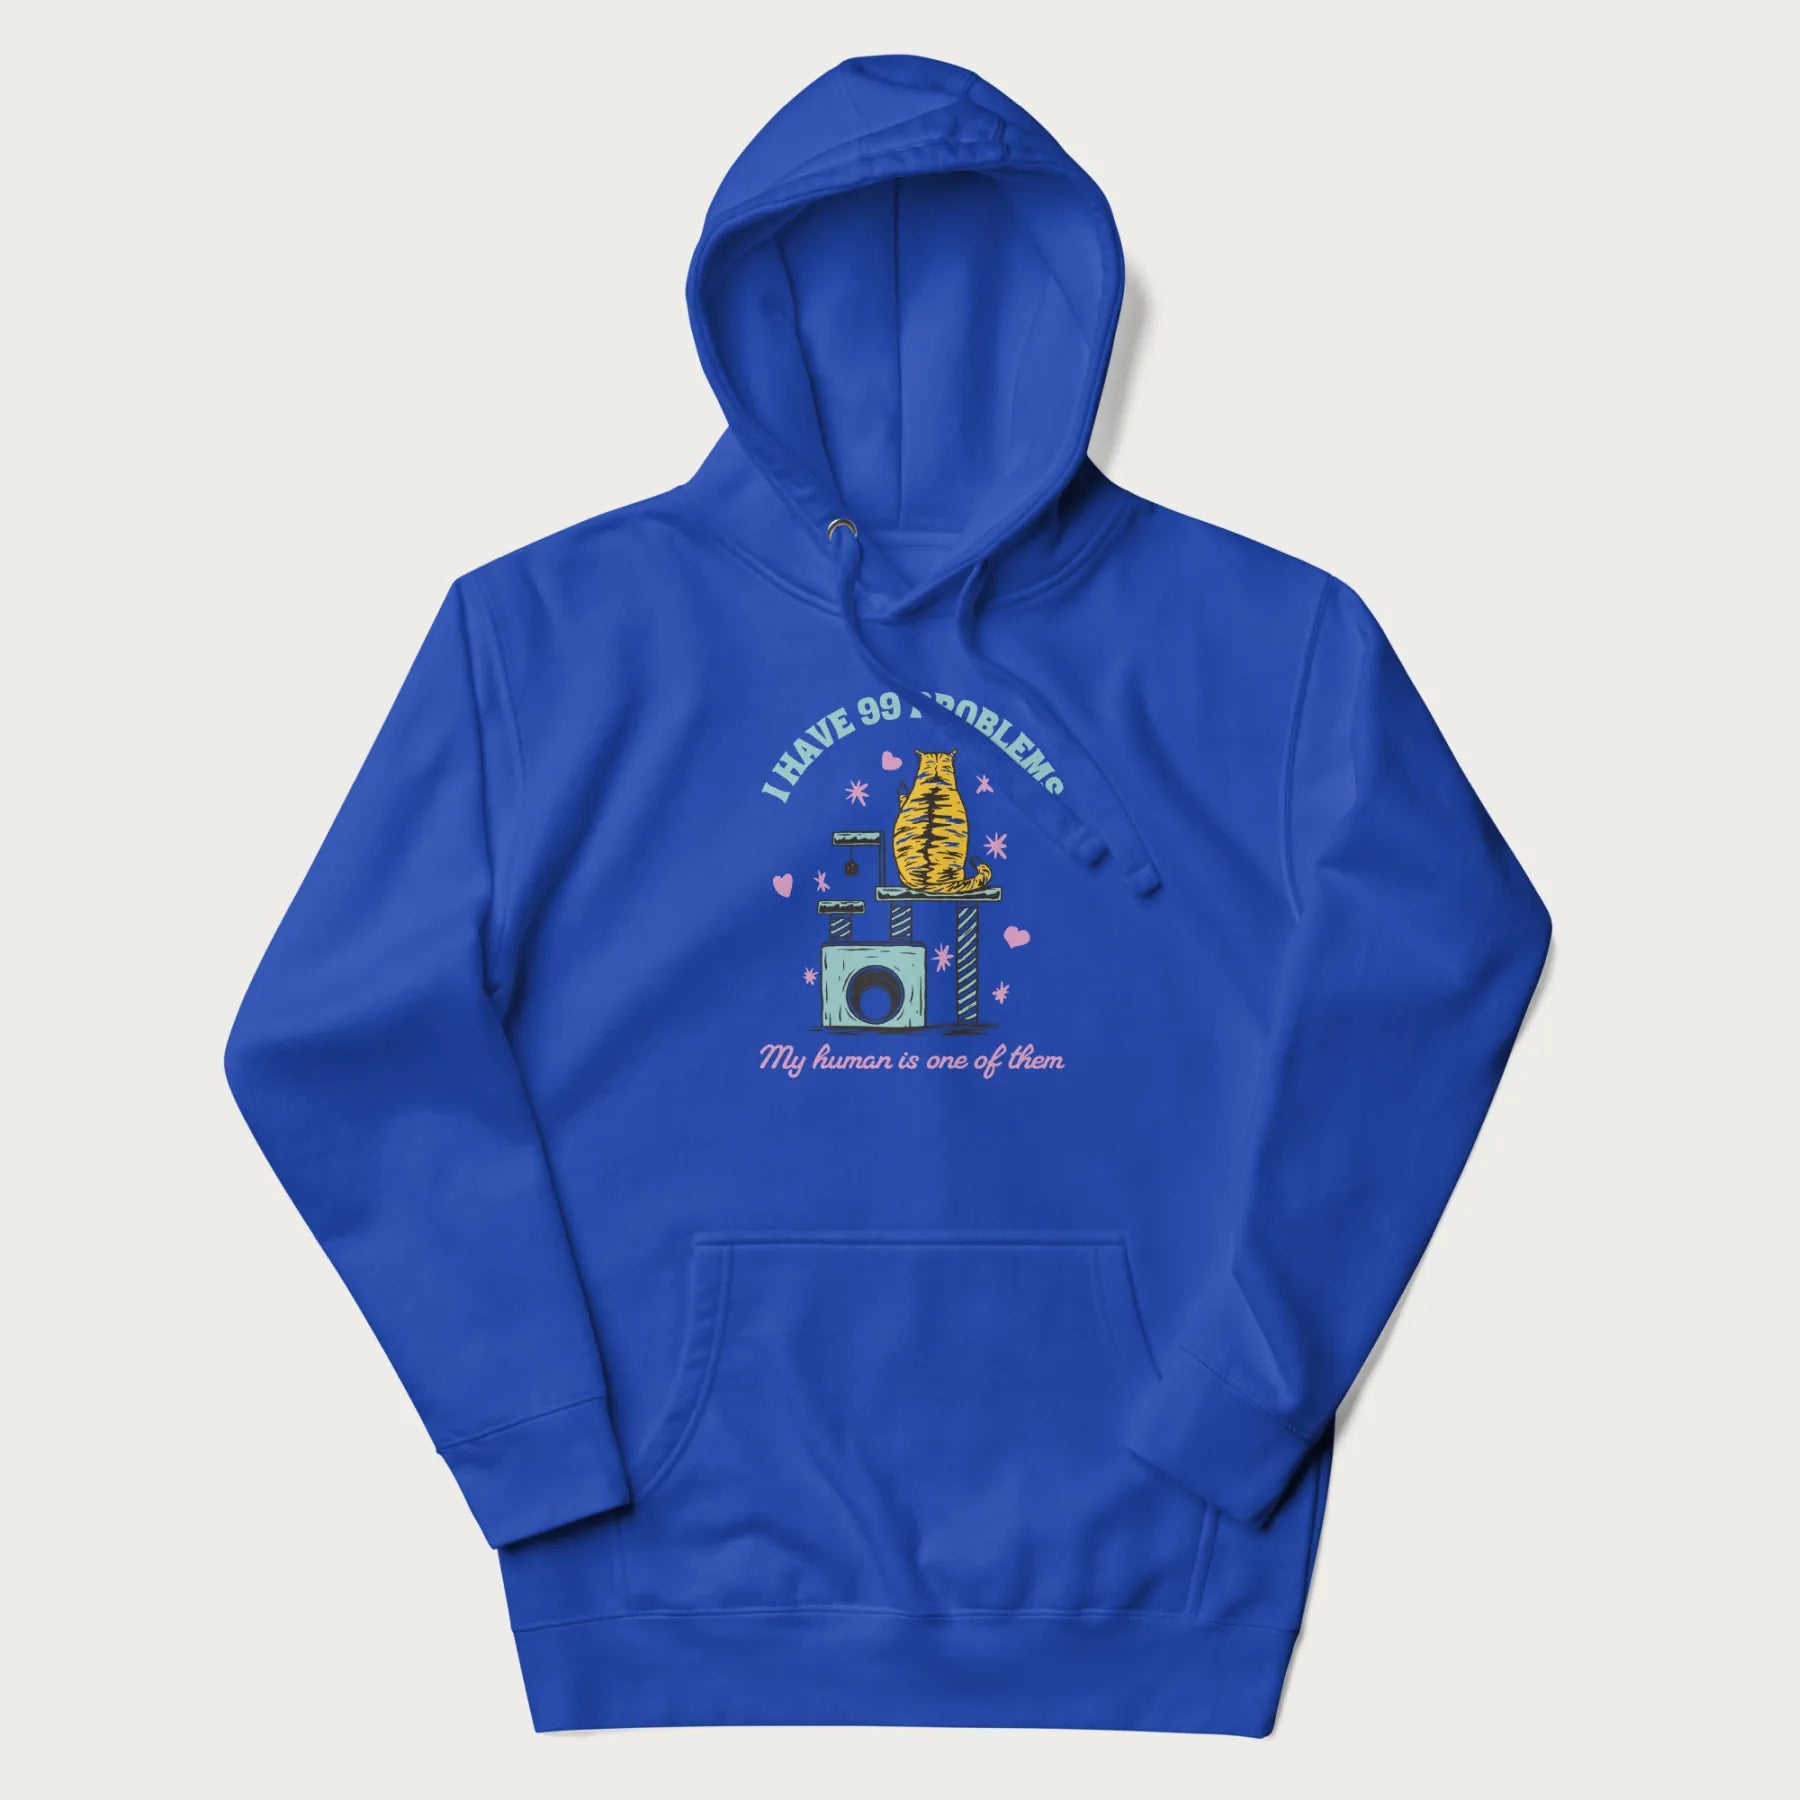 Royal blue hoodie with graphic of a cat on a scratching post and text 'i have 99 problems, my human is one of them'.